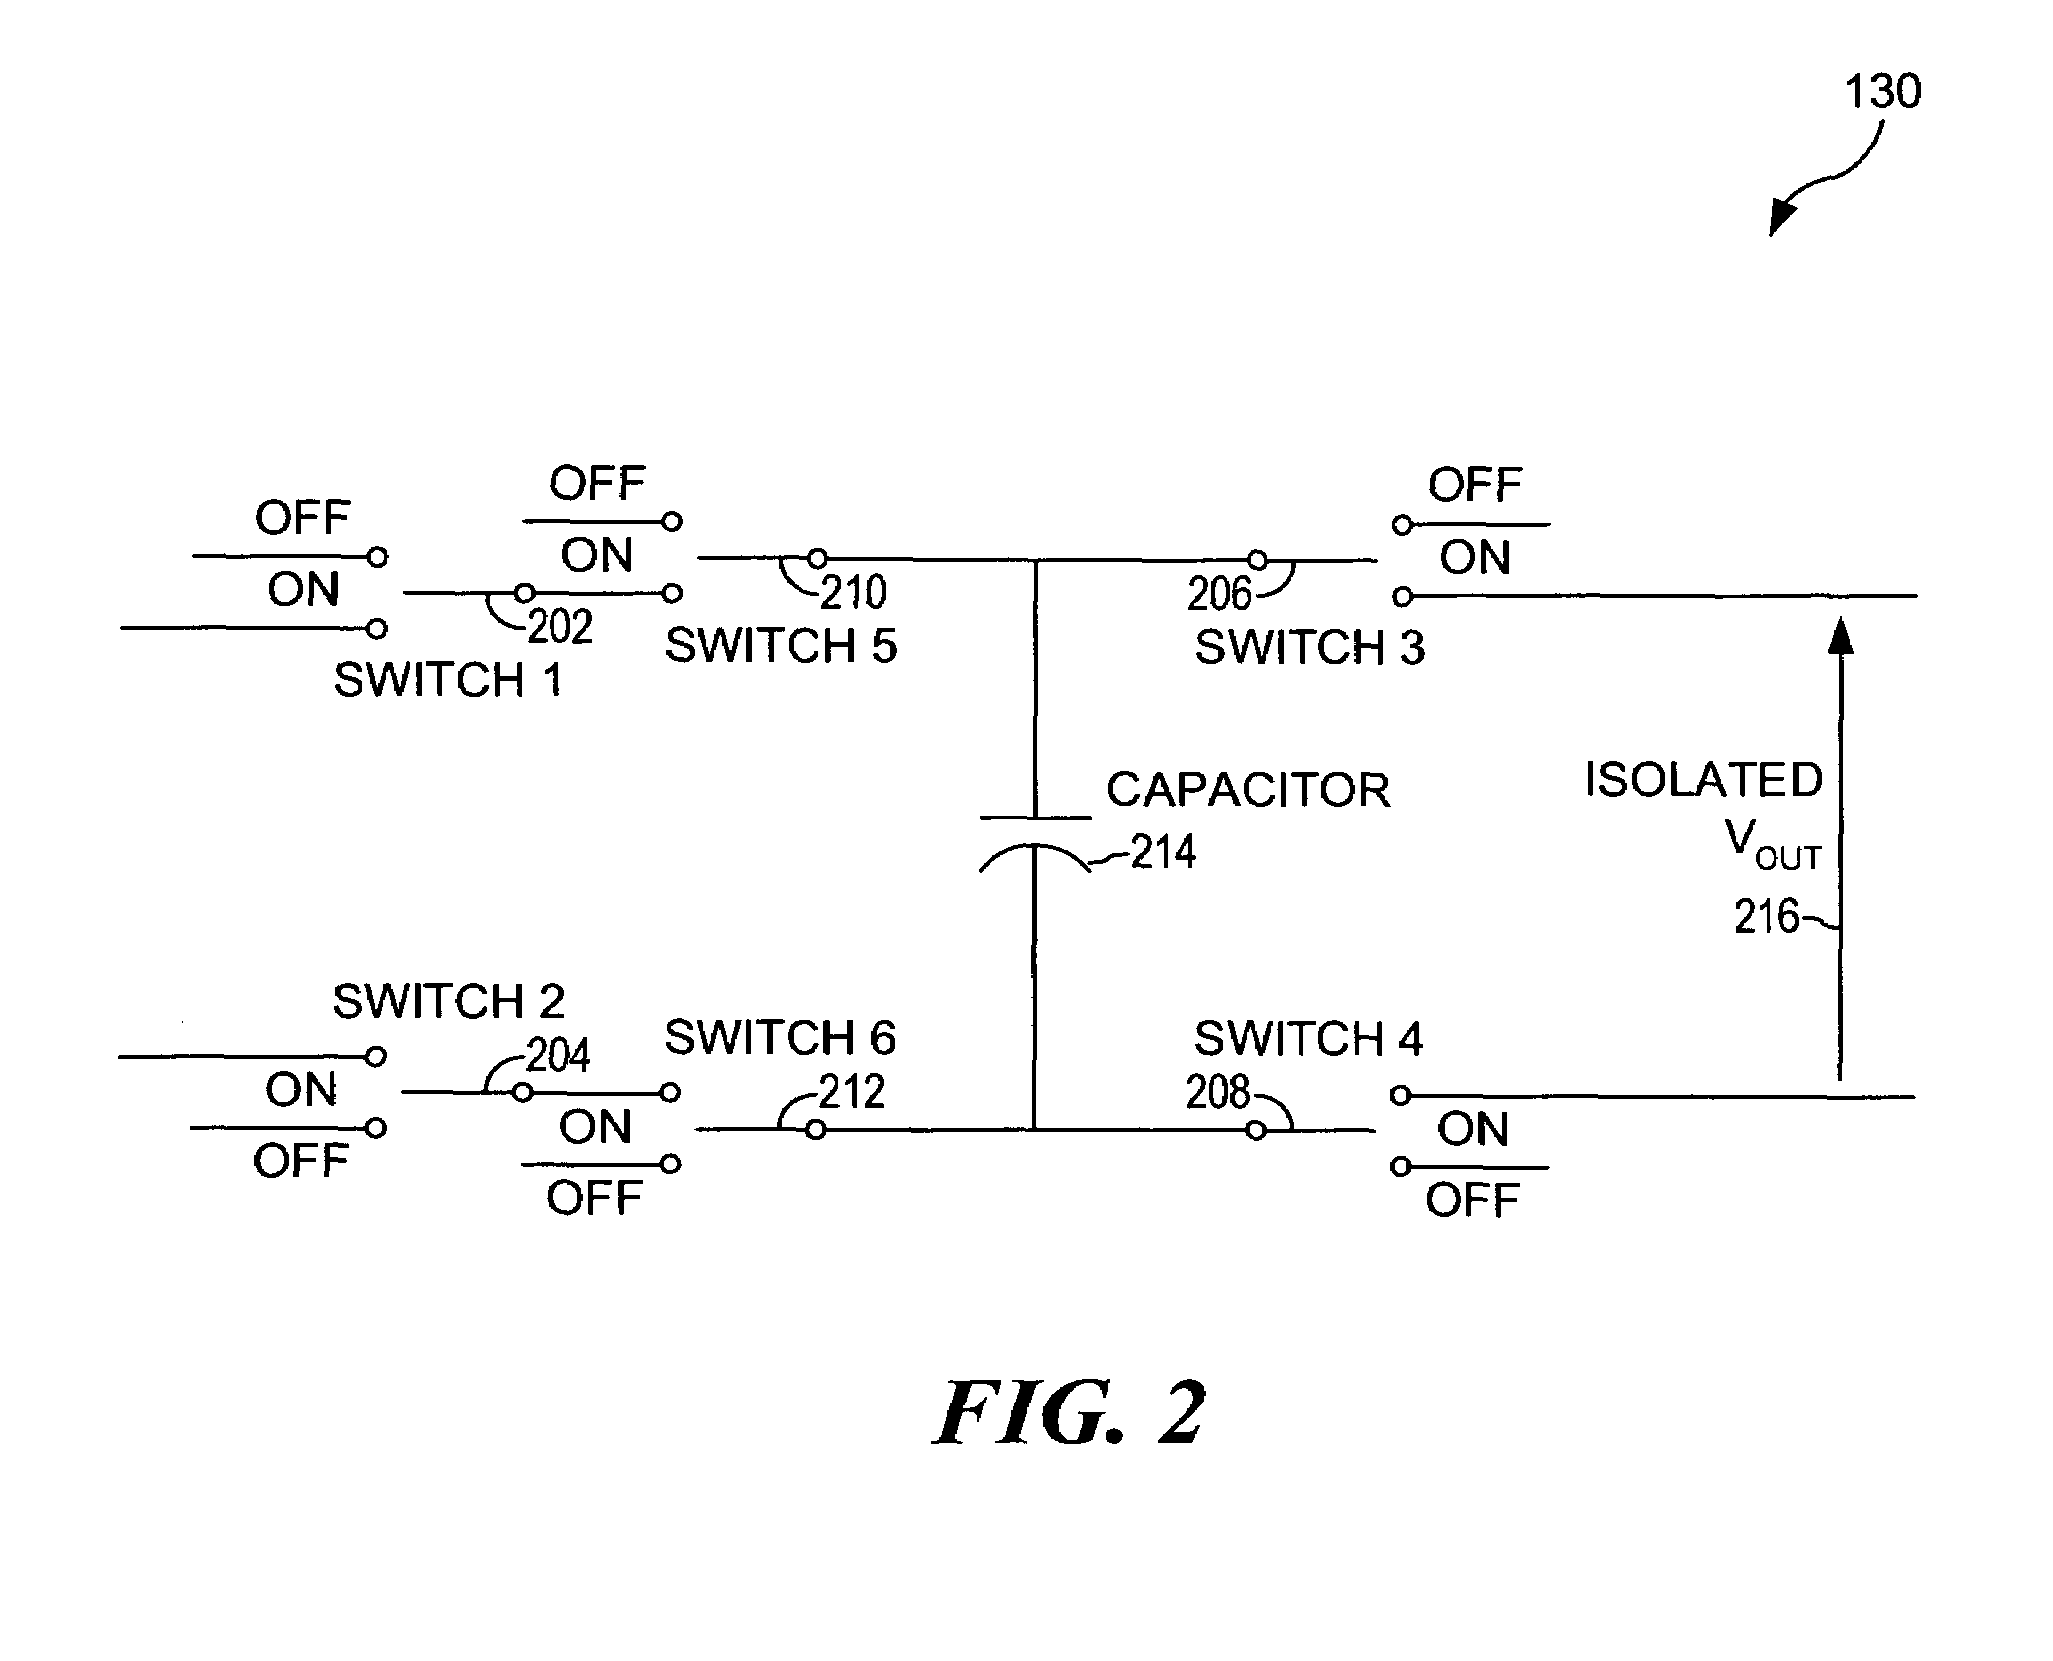 Signal identification method and apparatus for analogue electrical systems